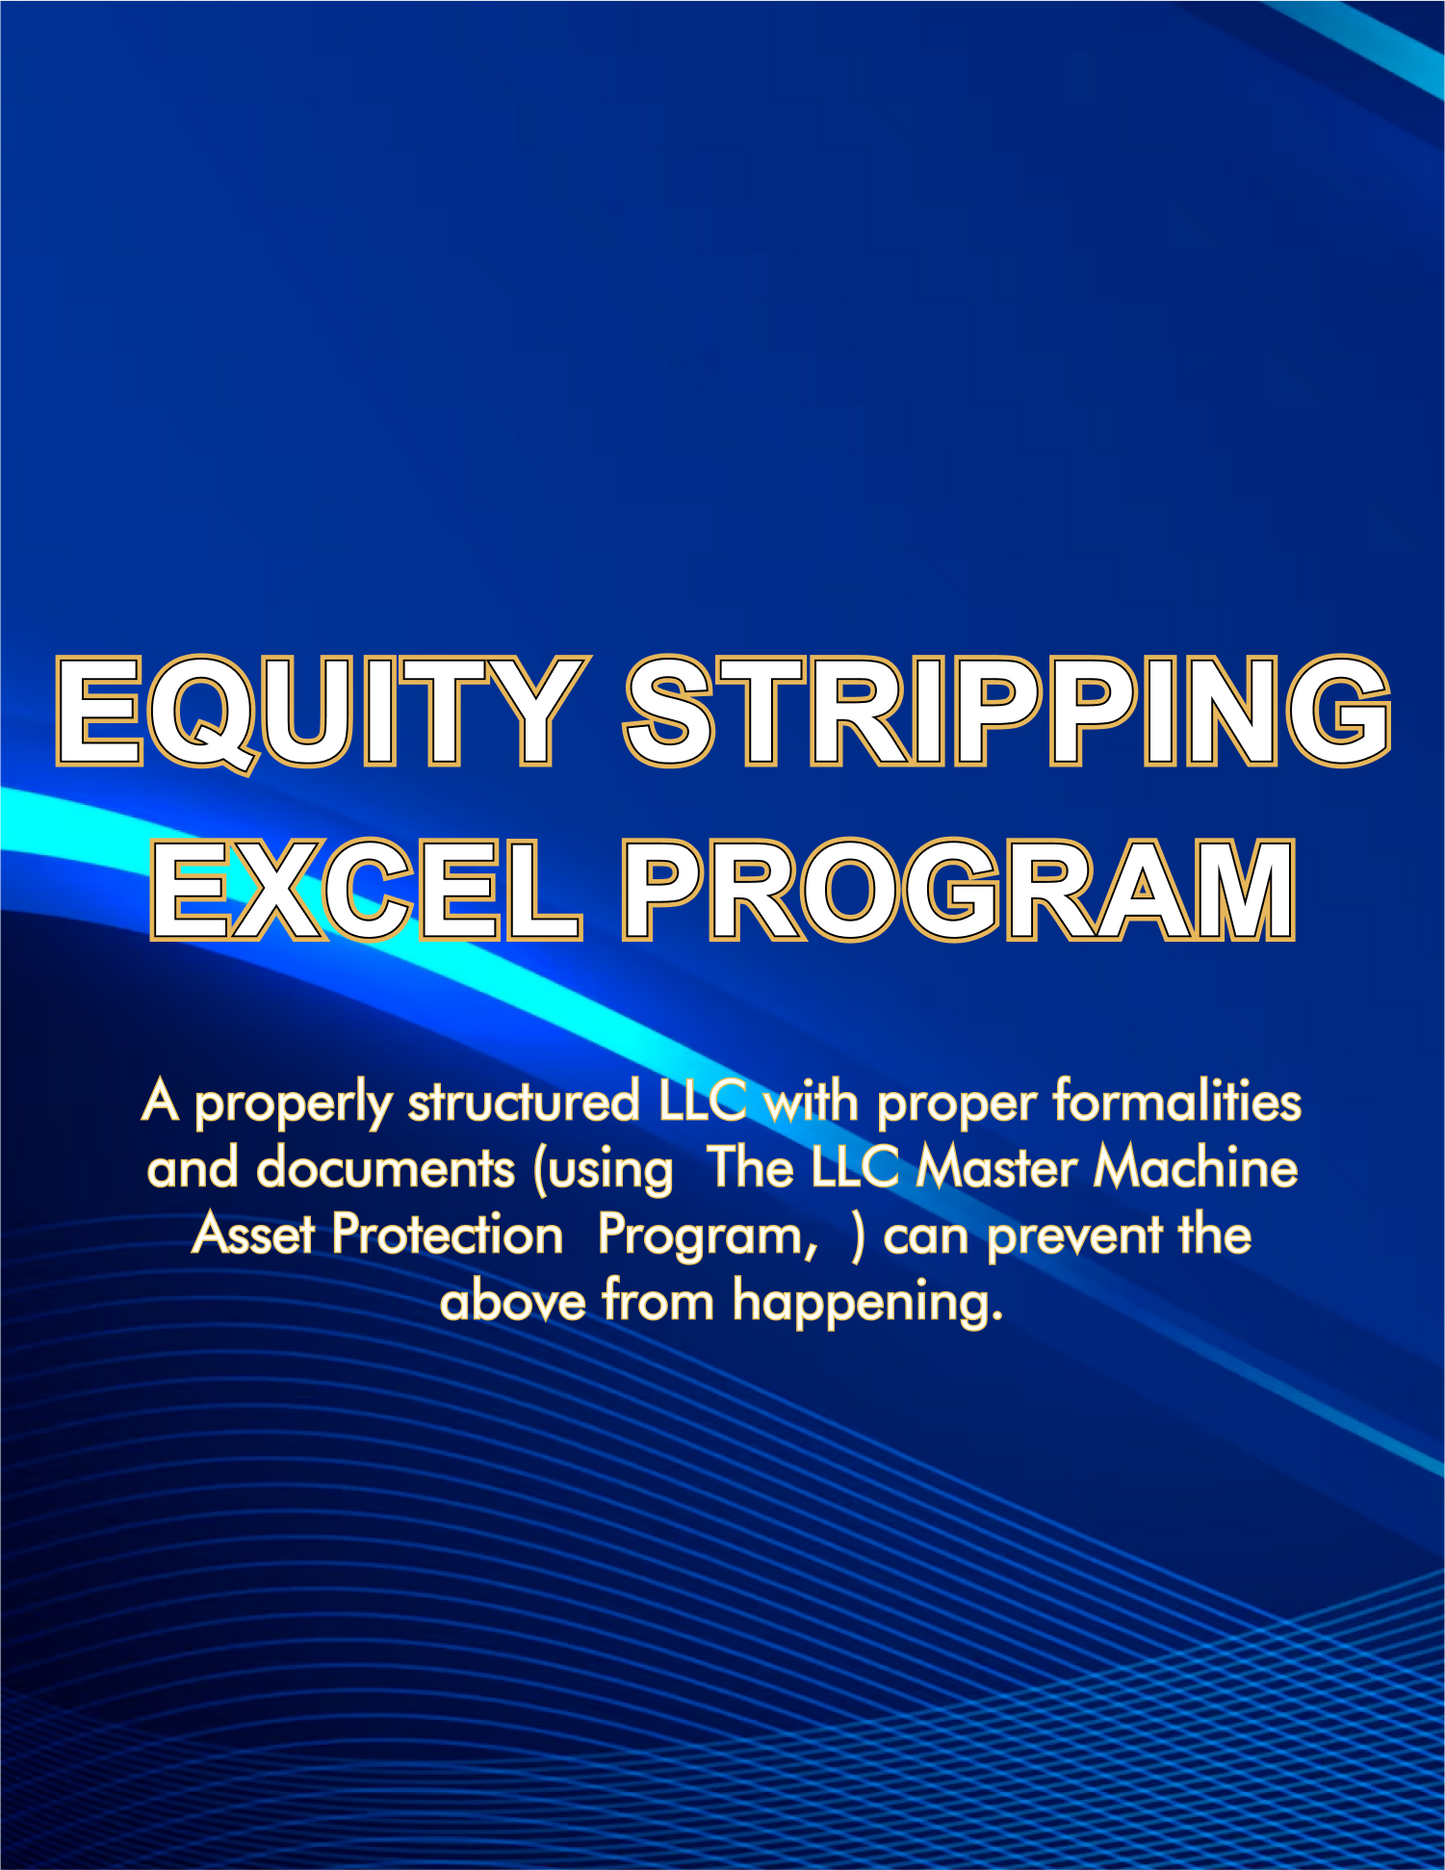 Equity Stripping Excel Program